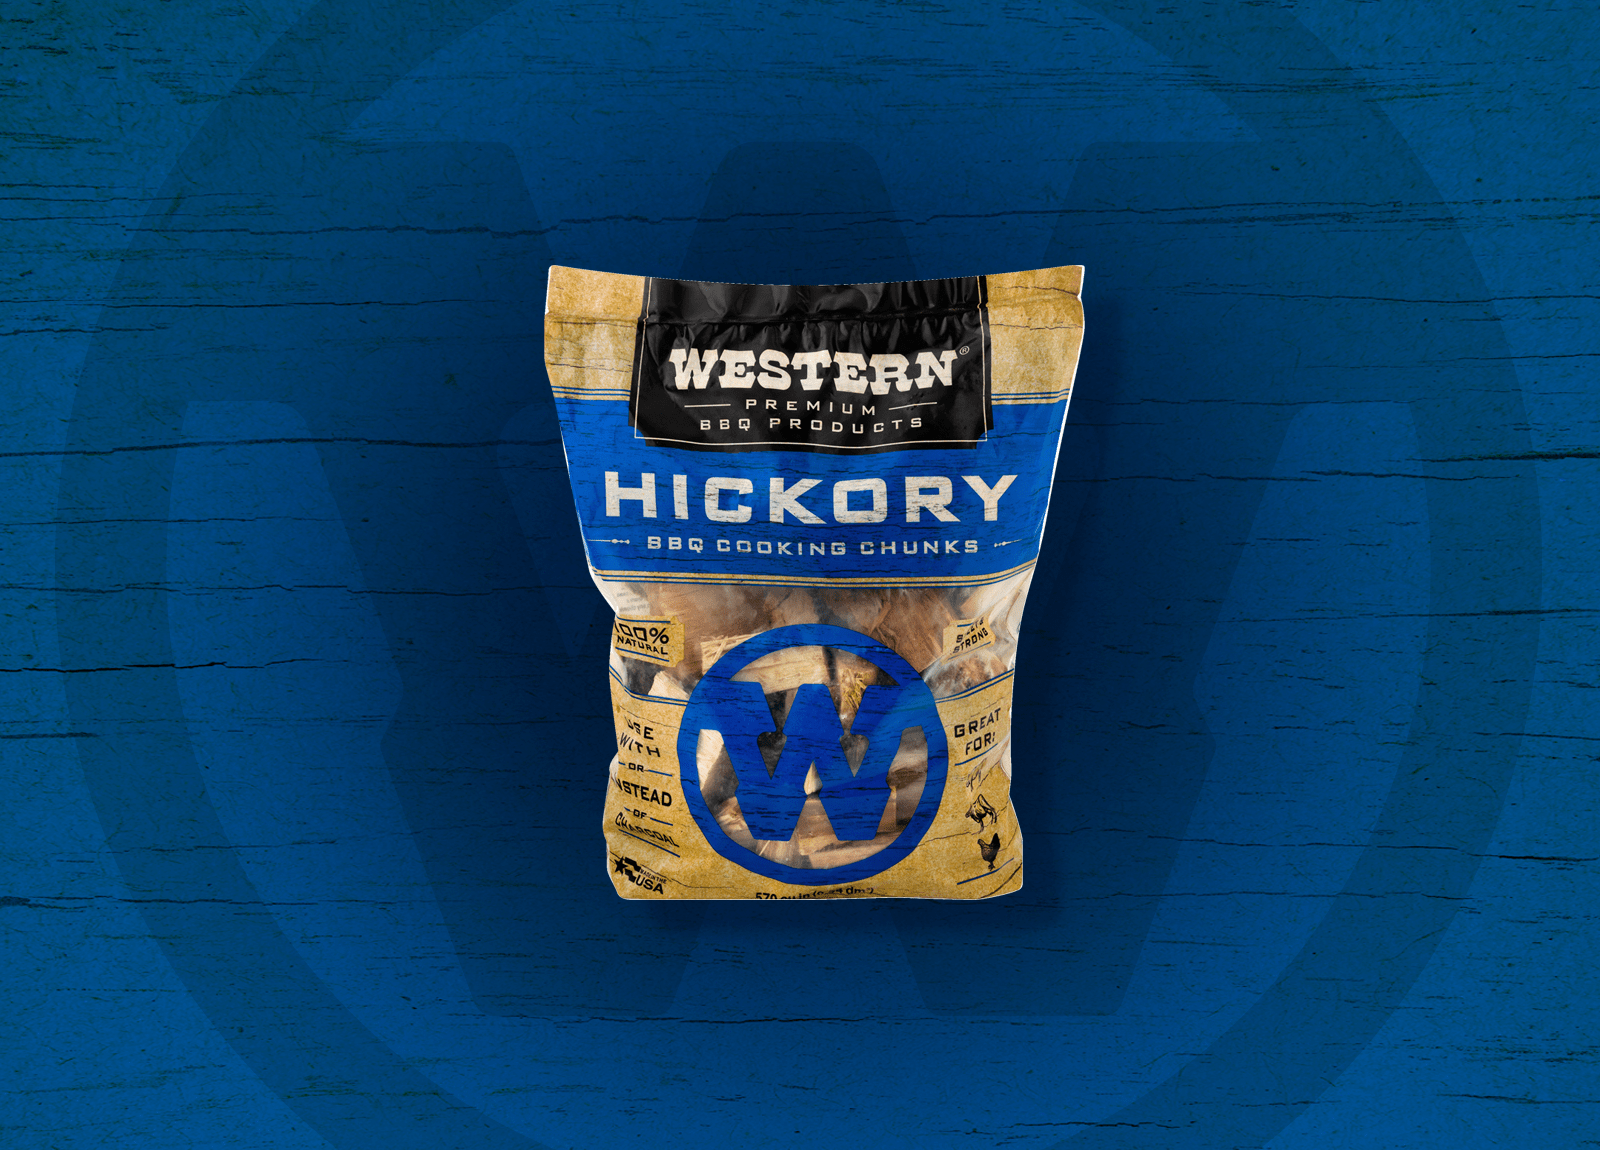 Western Hickory BBQ Cooking Chunks